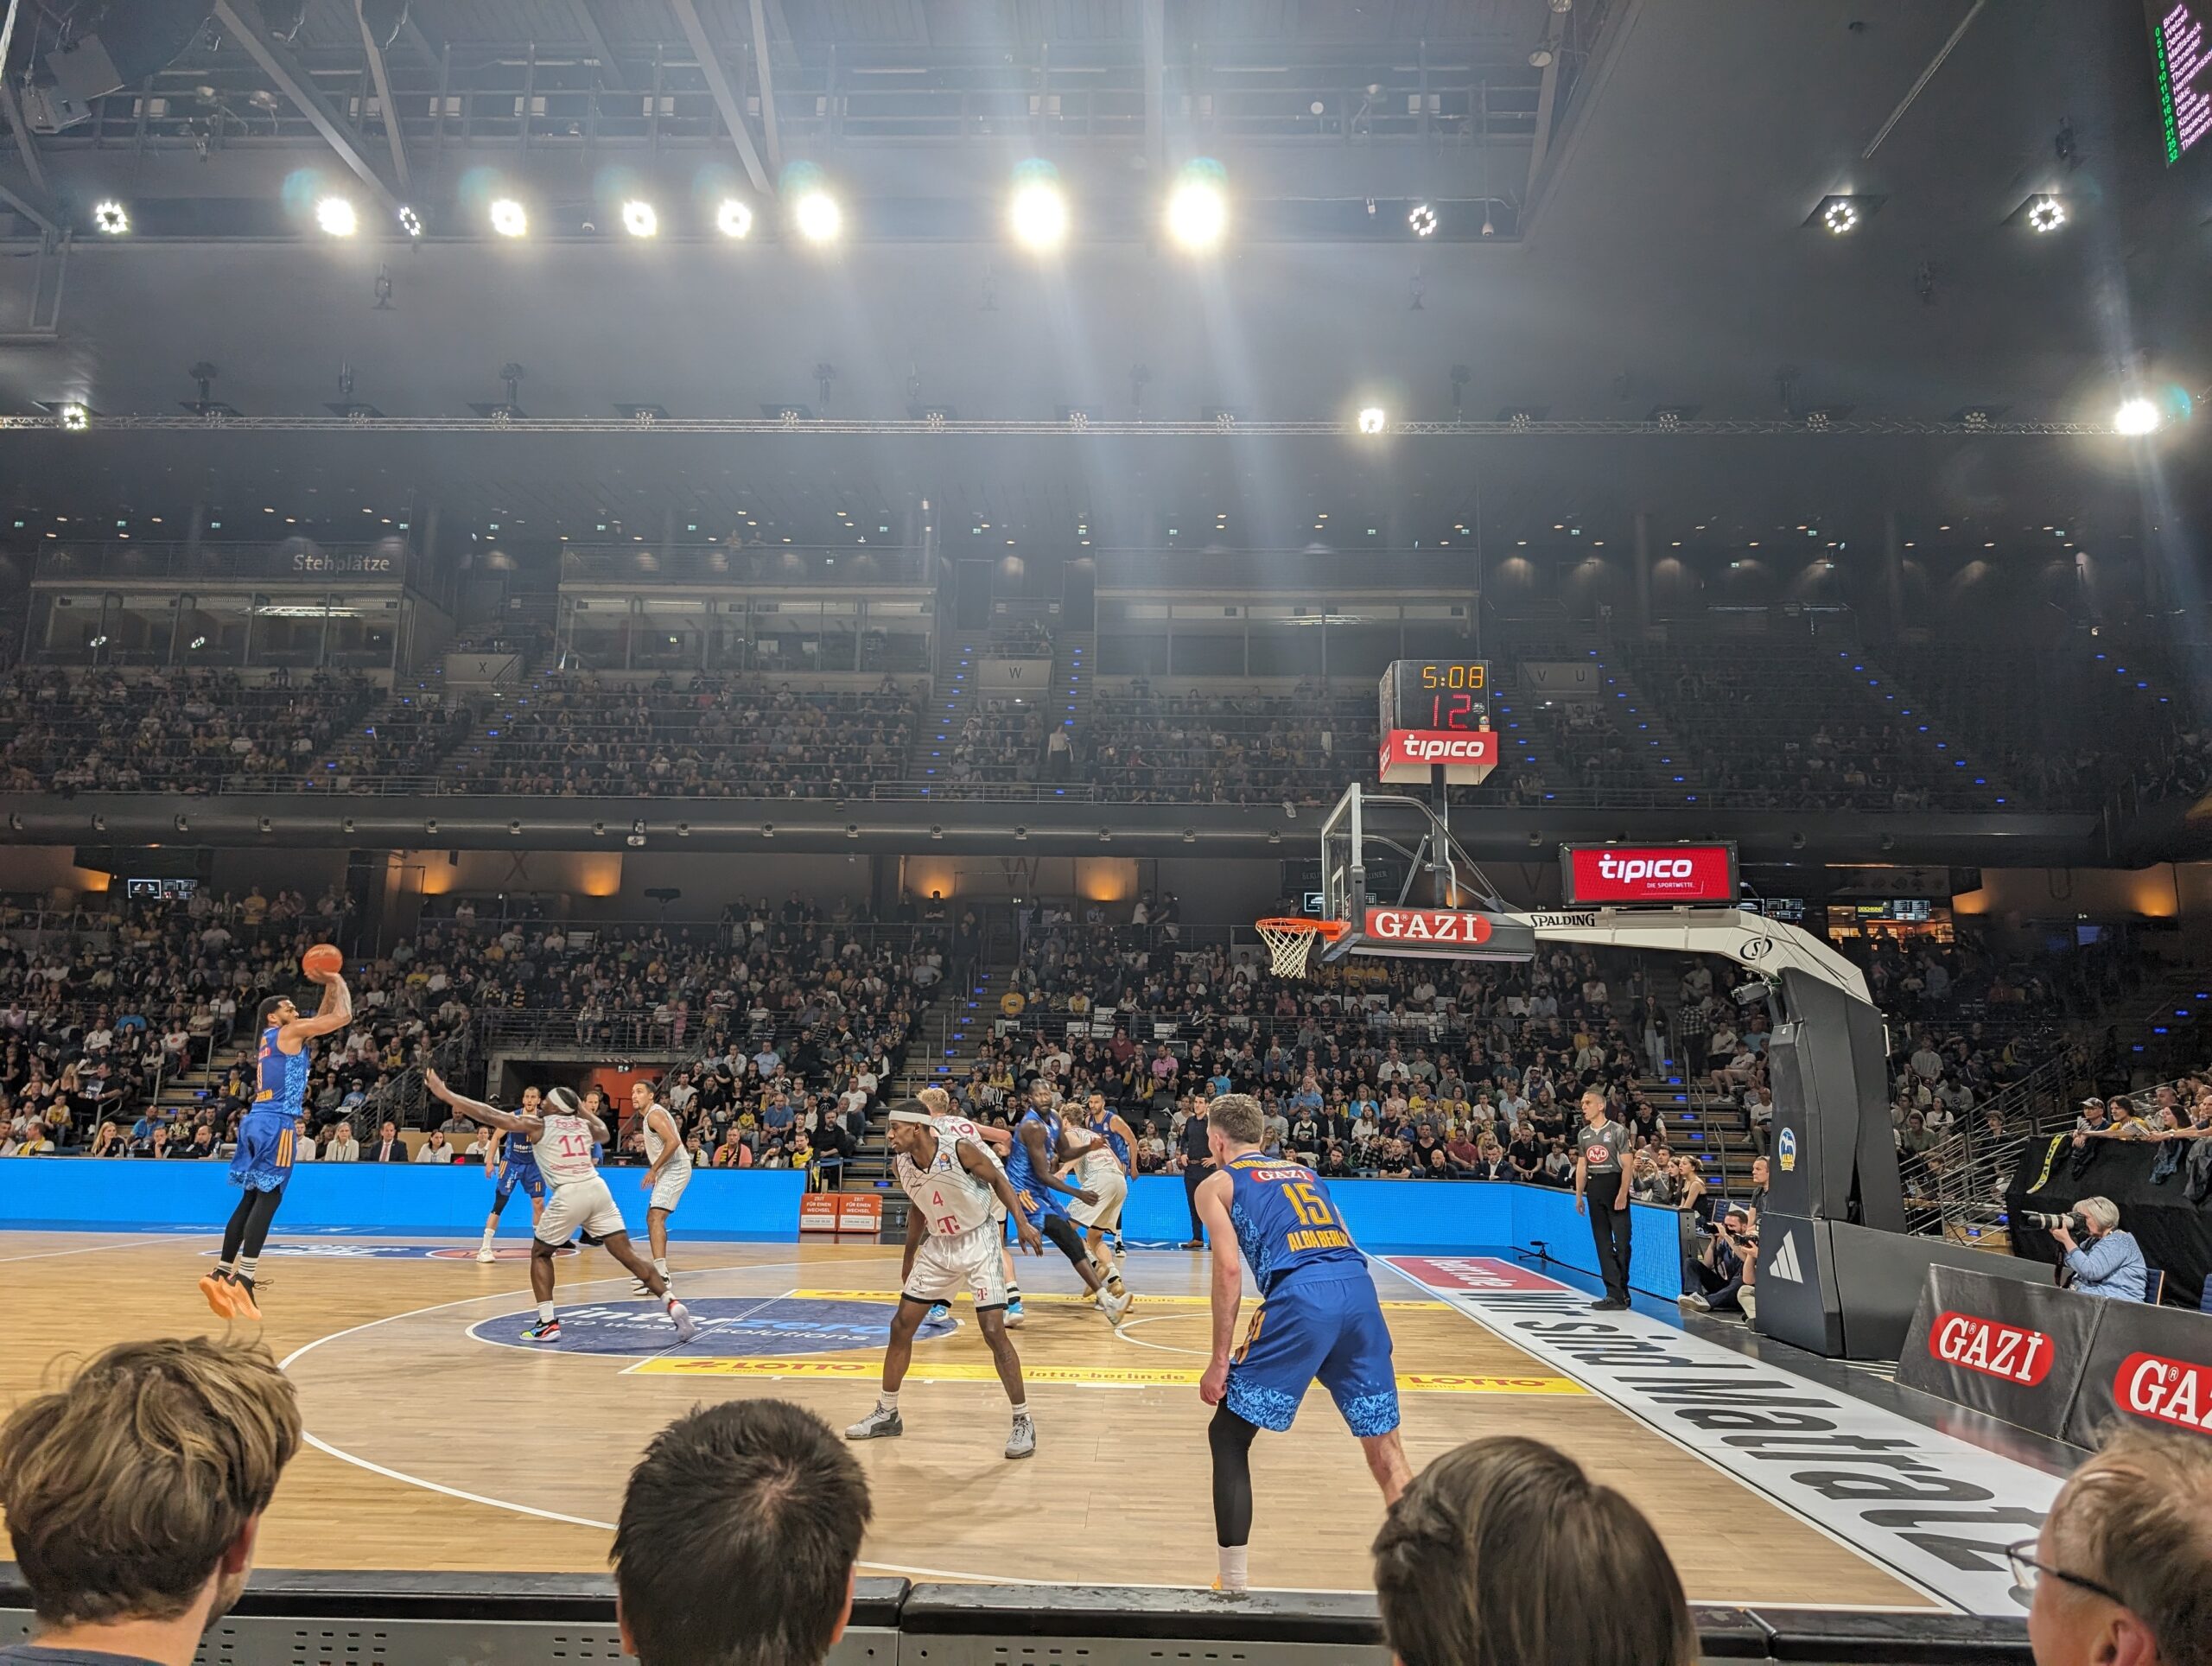 The atmosphere was electric for the full 40 minutes. That isn't happenstance. It involves building a culture with the fanbase. That should hold value to the likes of Euroleague.